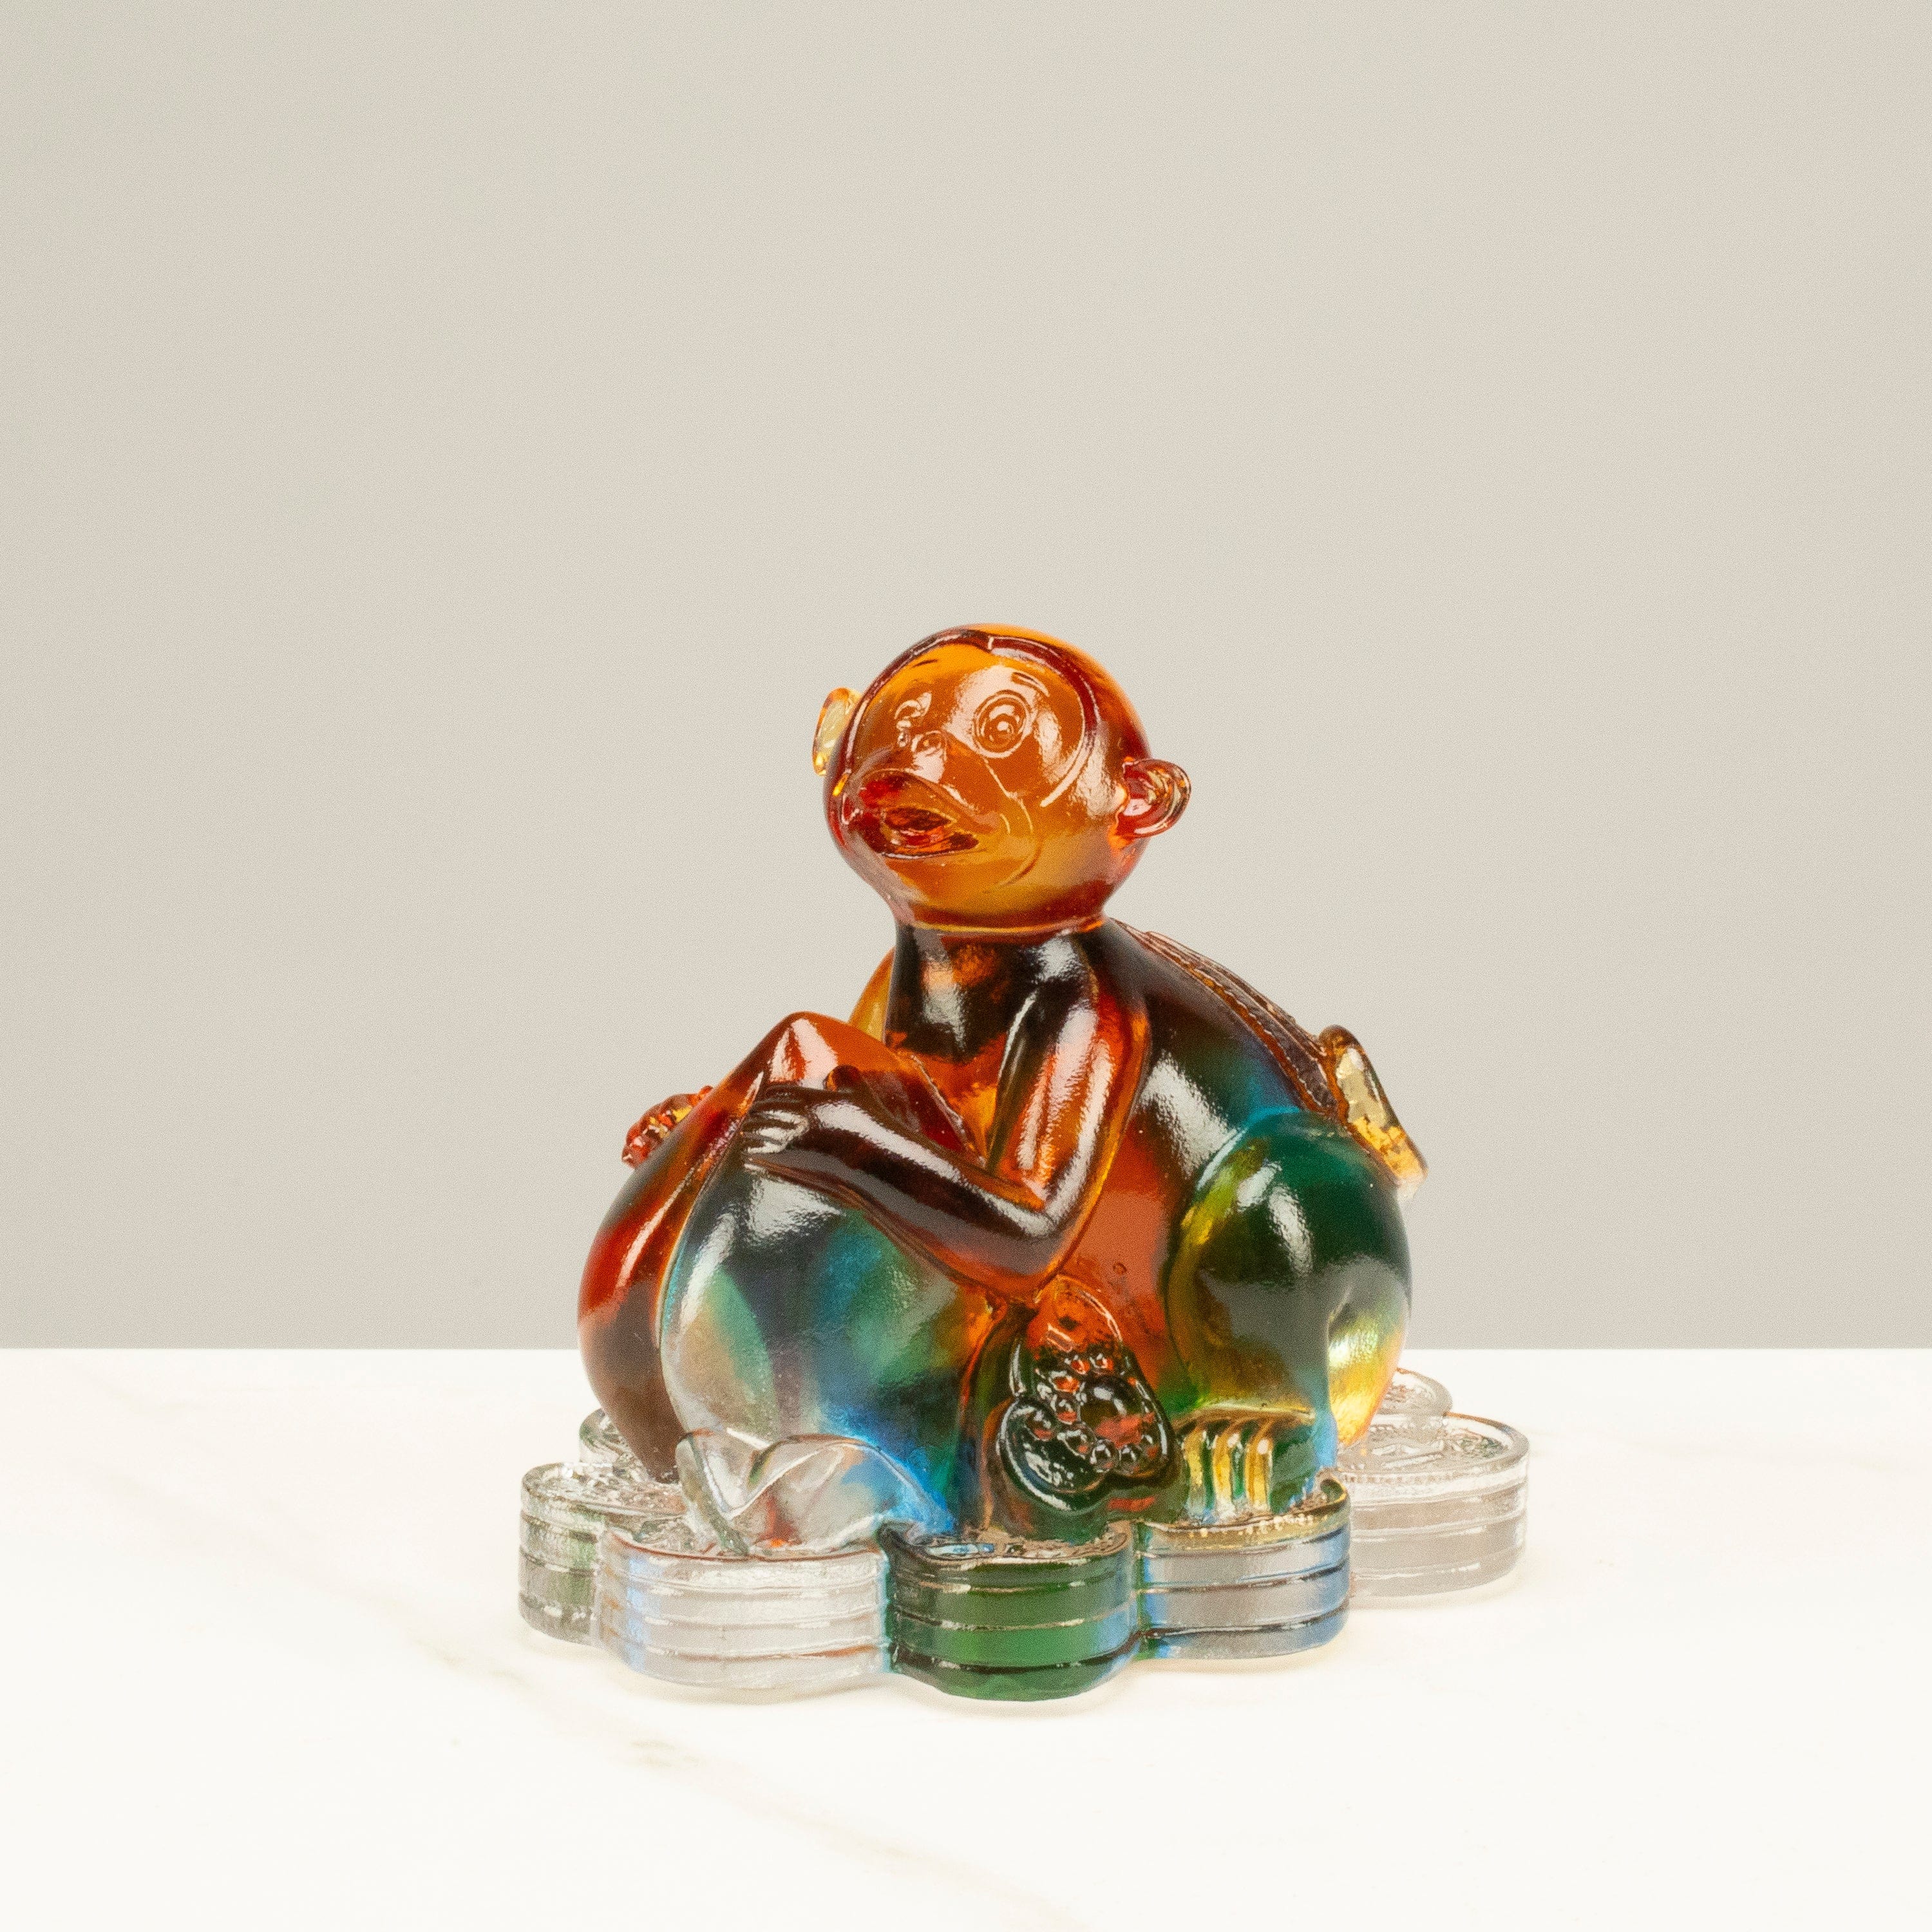 Kalifano Crystal Carving Mischievous Monkey Crystal Carving - A Symbol of Intelligence and Playfulness CRZ110-MON